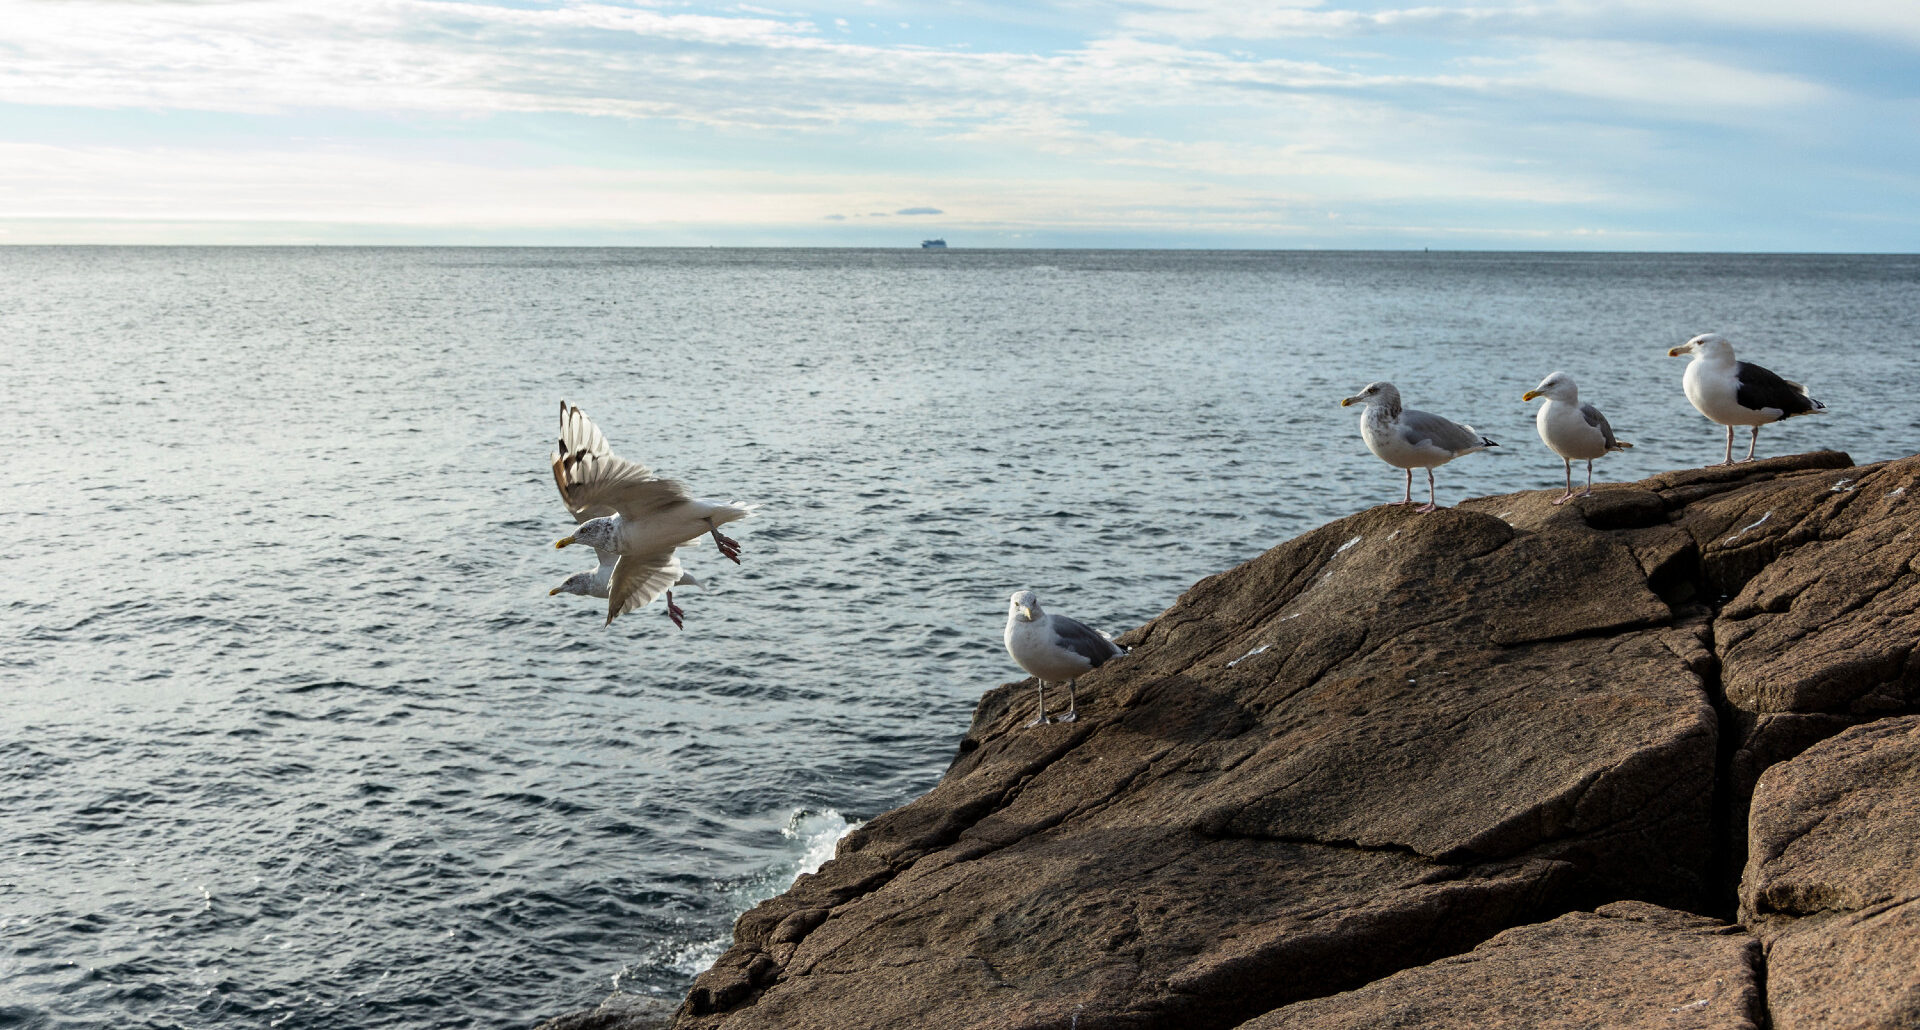 Gulls perch and take off from the rocks along the Ocean Path in Acadia National Park on Saturday, Oct. 8, 2022. (Photo by Lily LaRegina/Friends of Acadia)